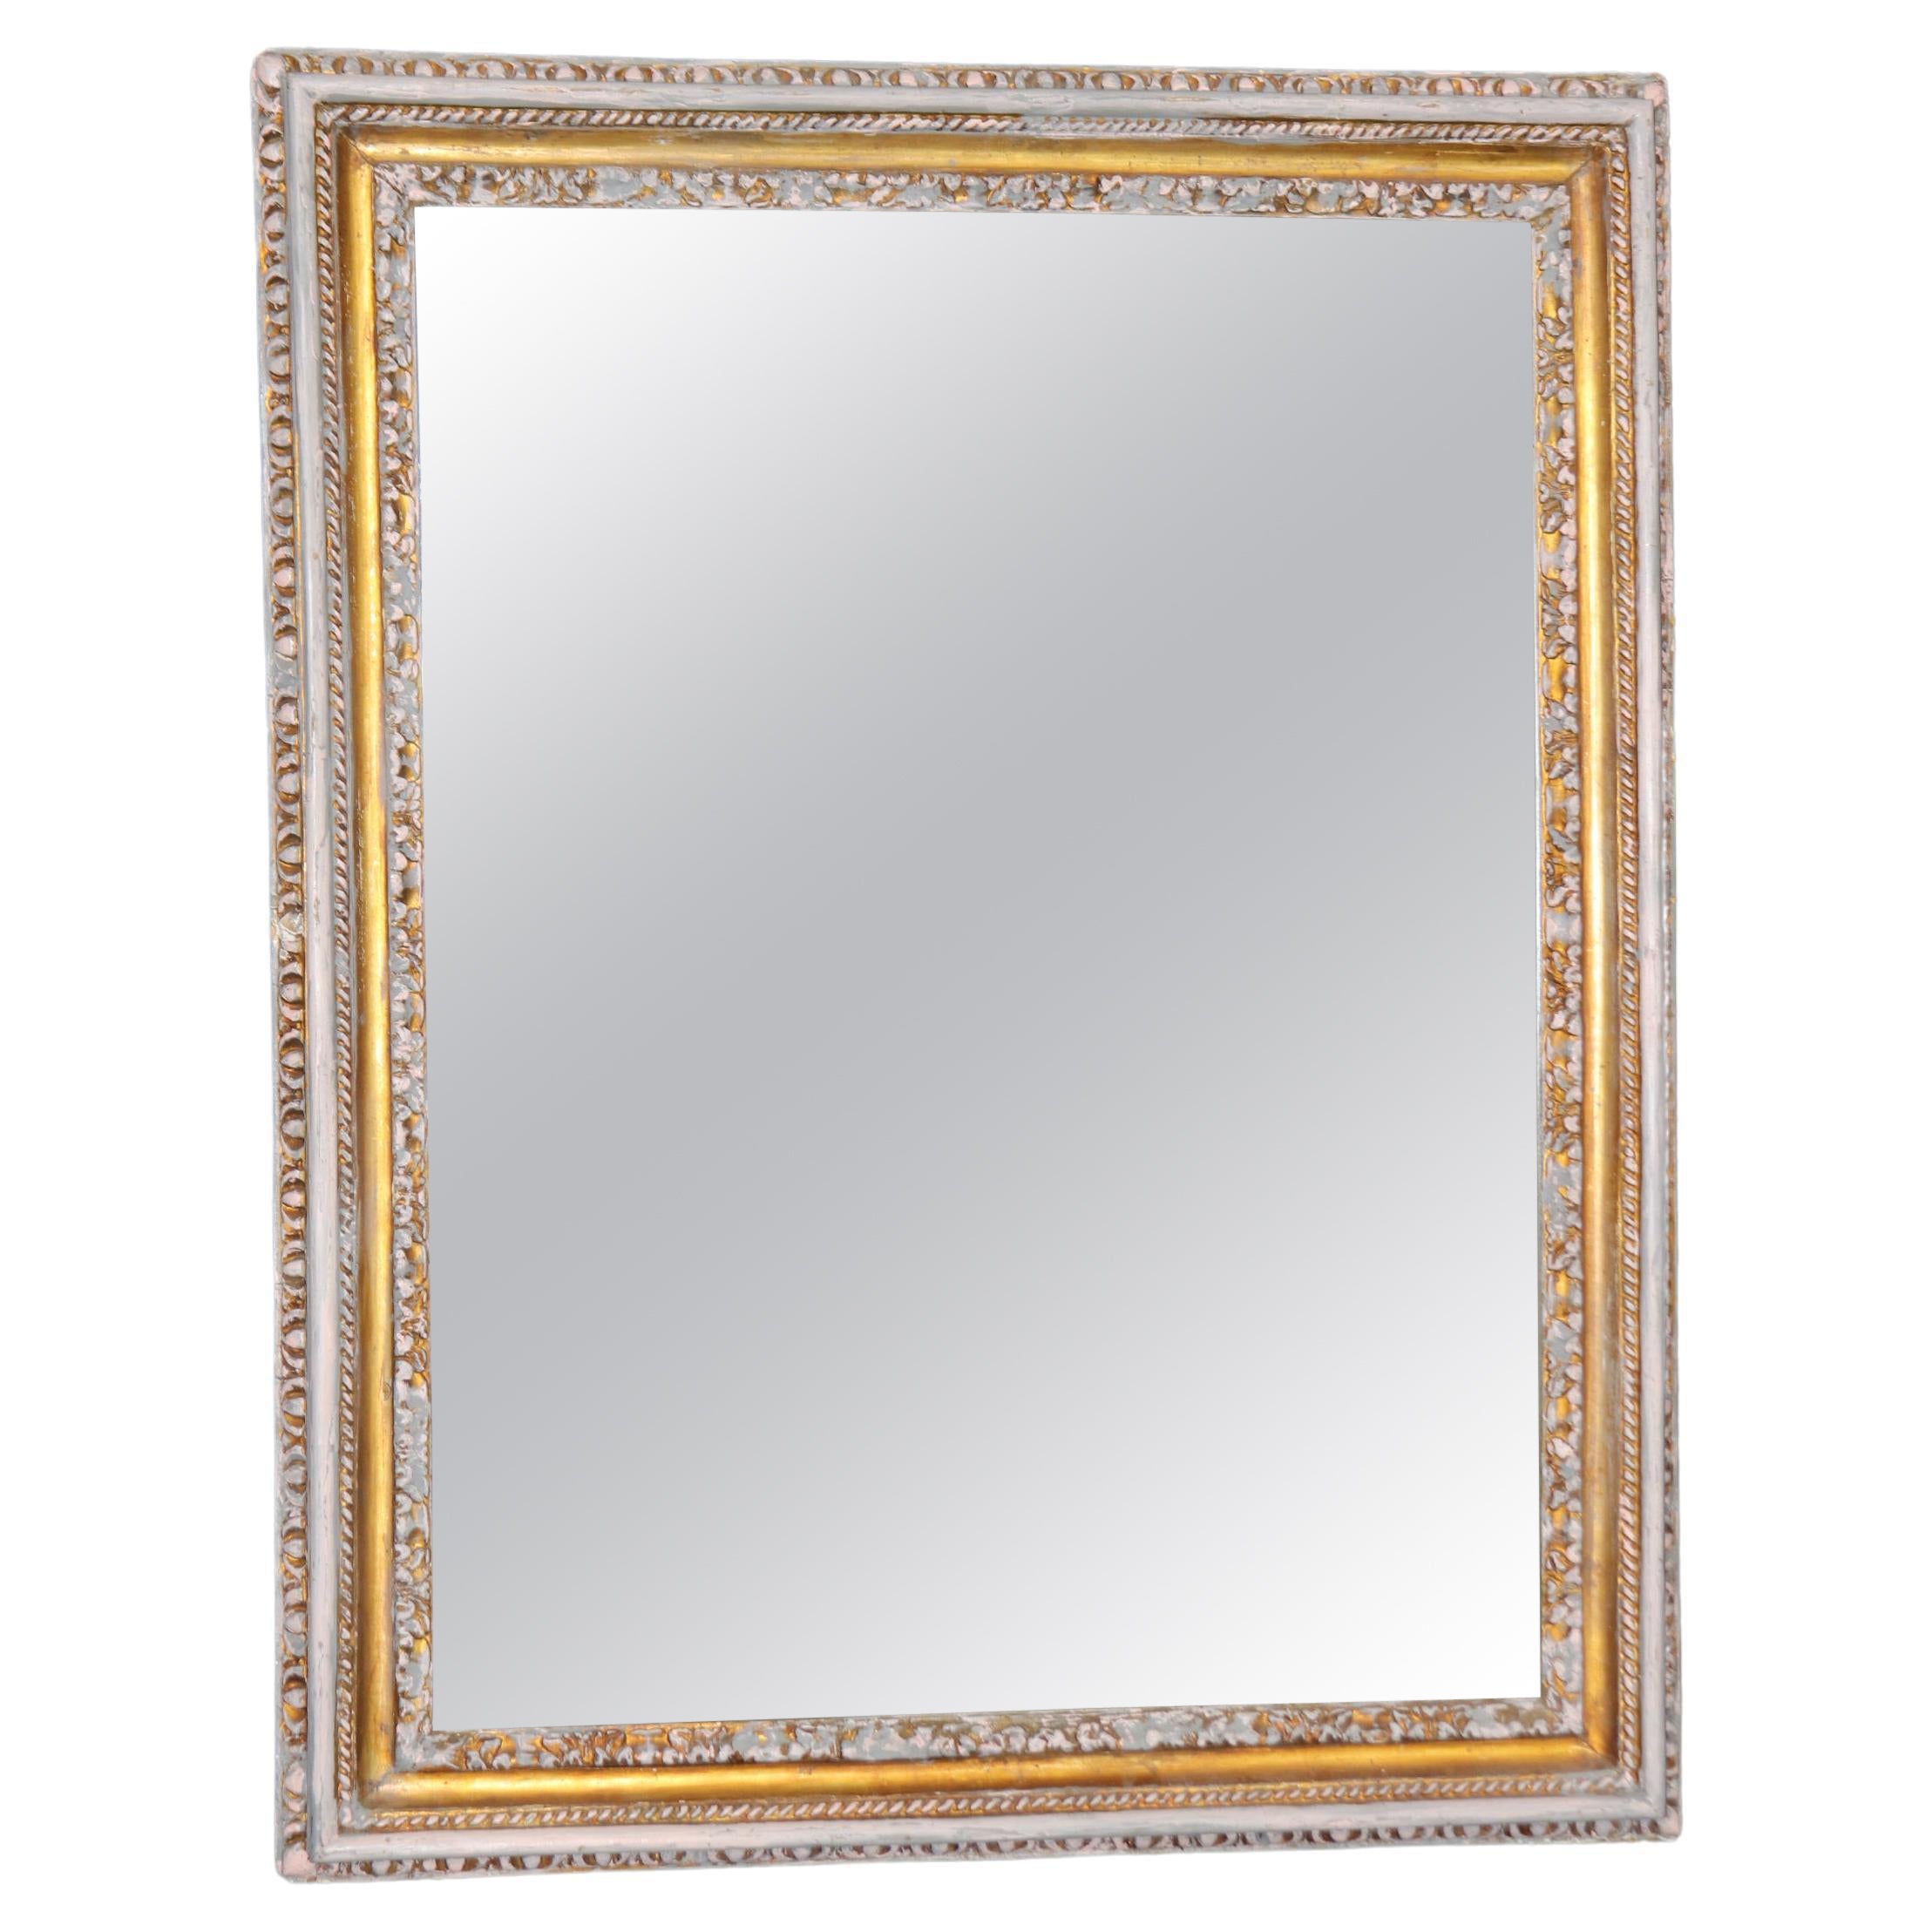 Antique 19th Century Louis XVI Style Distressed Silver & Gilt Wall Mirror For Sale